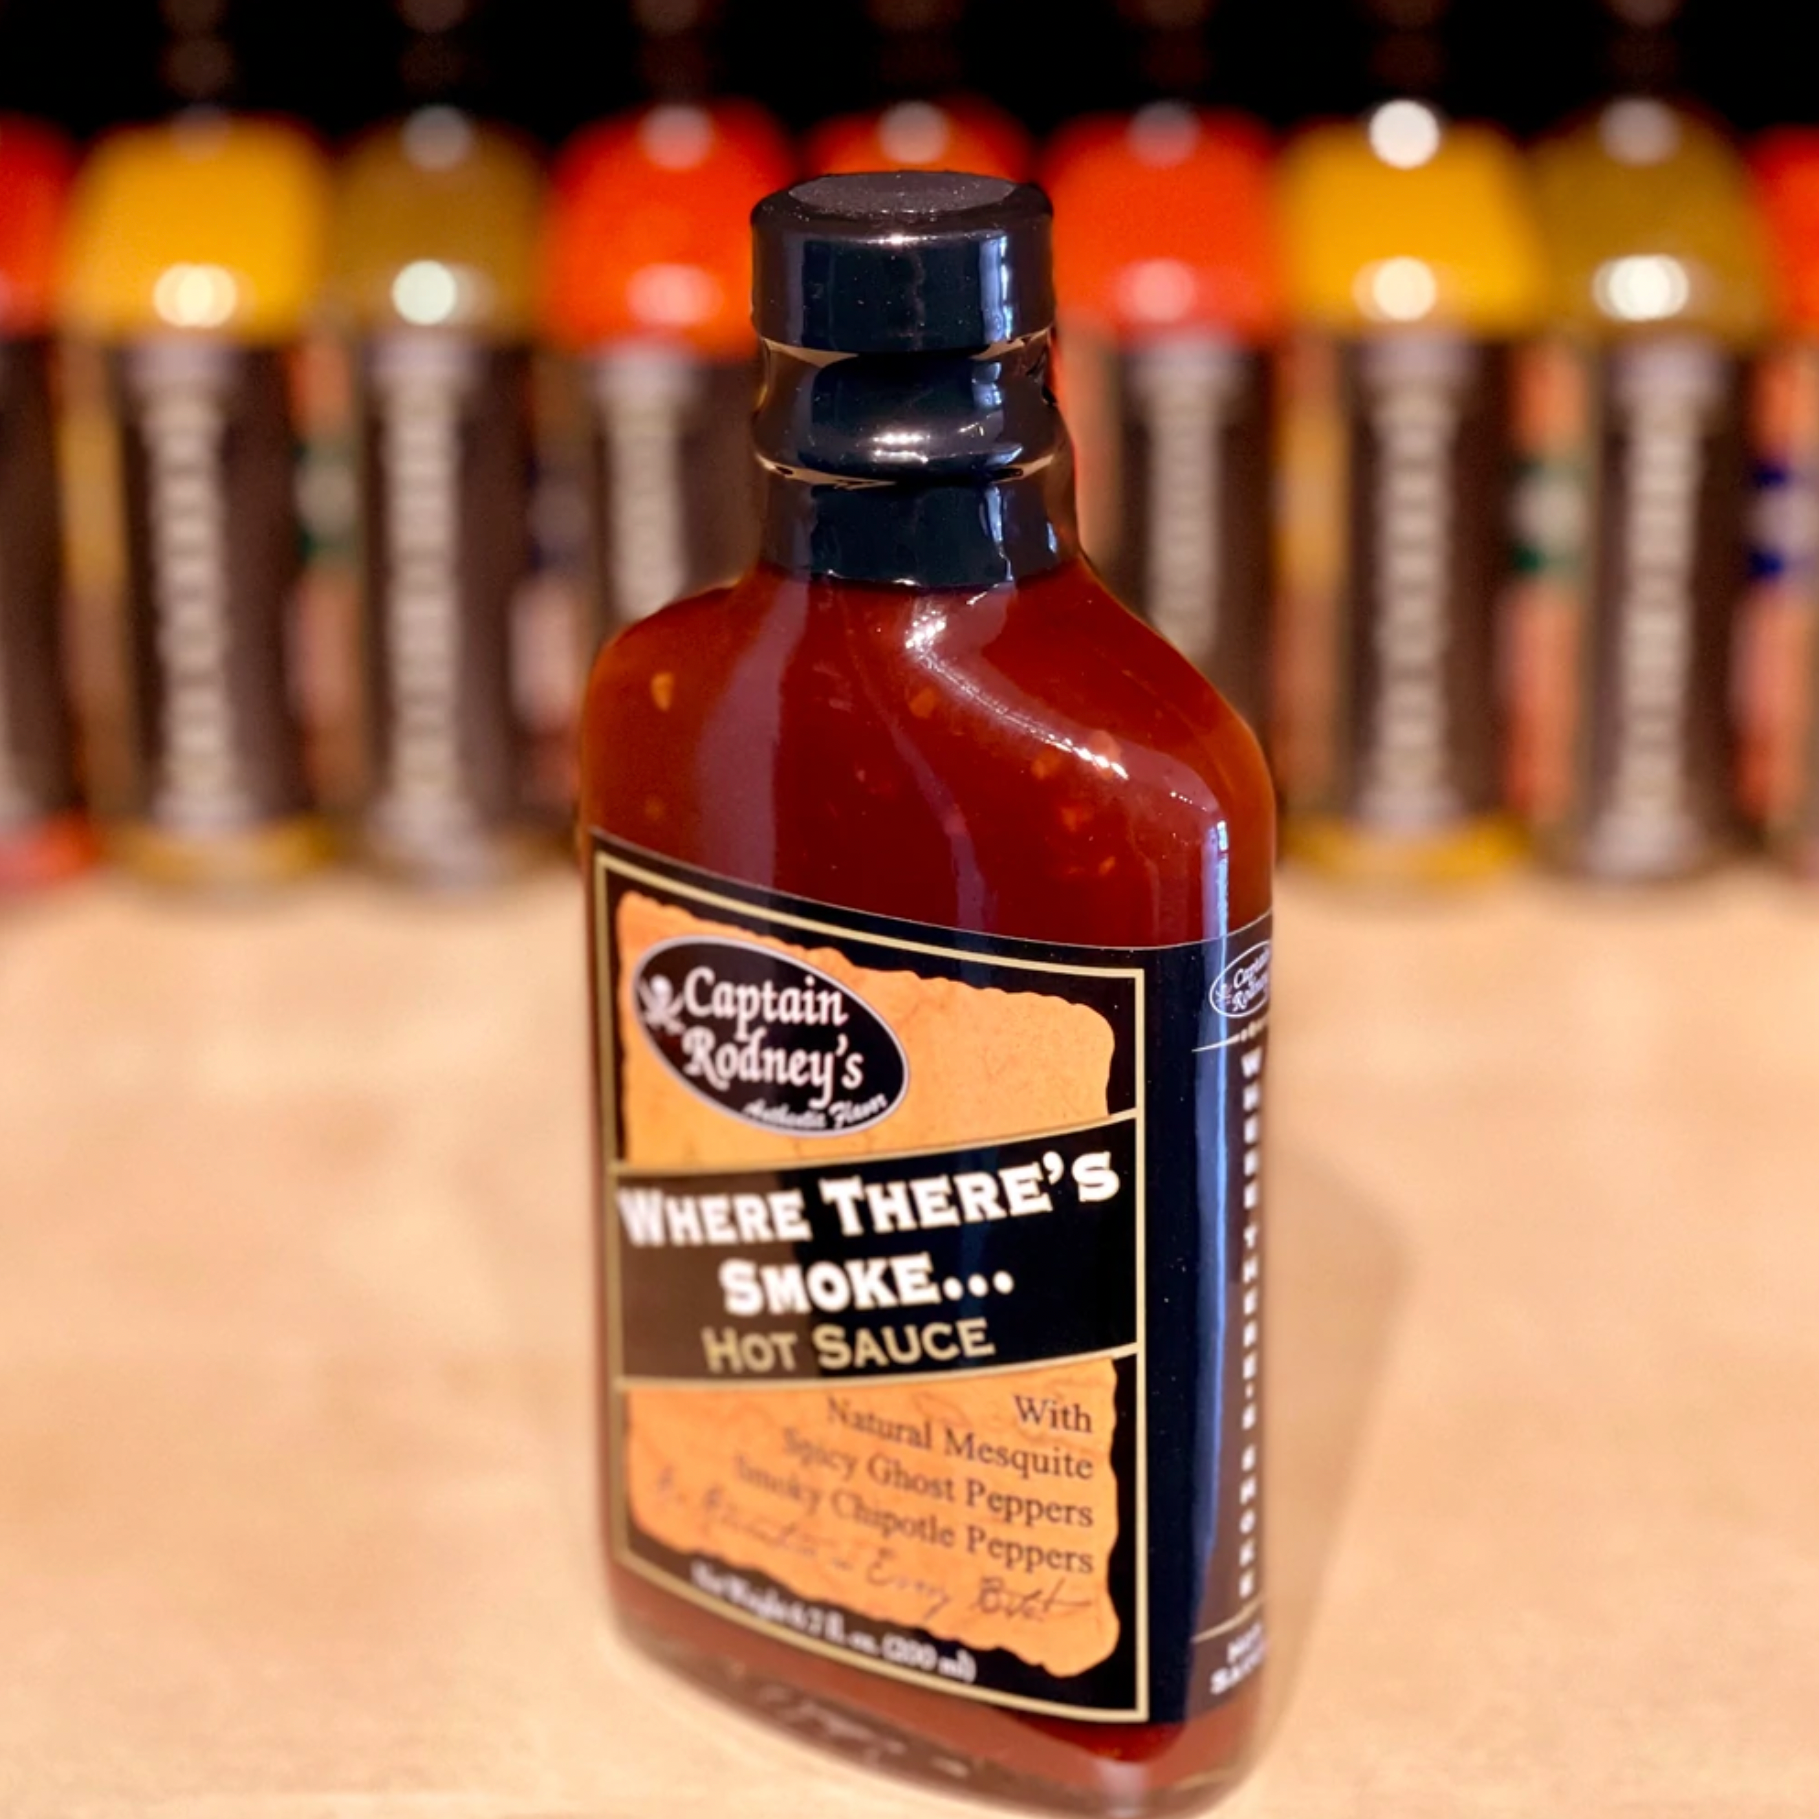 Captain Rodney's Private Reserve Where There's Smoke Hot Sauce